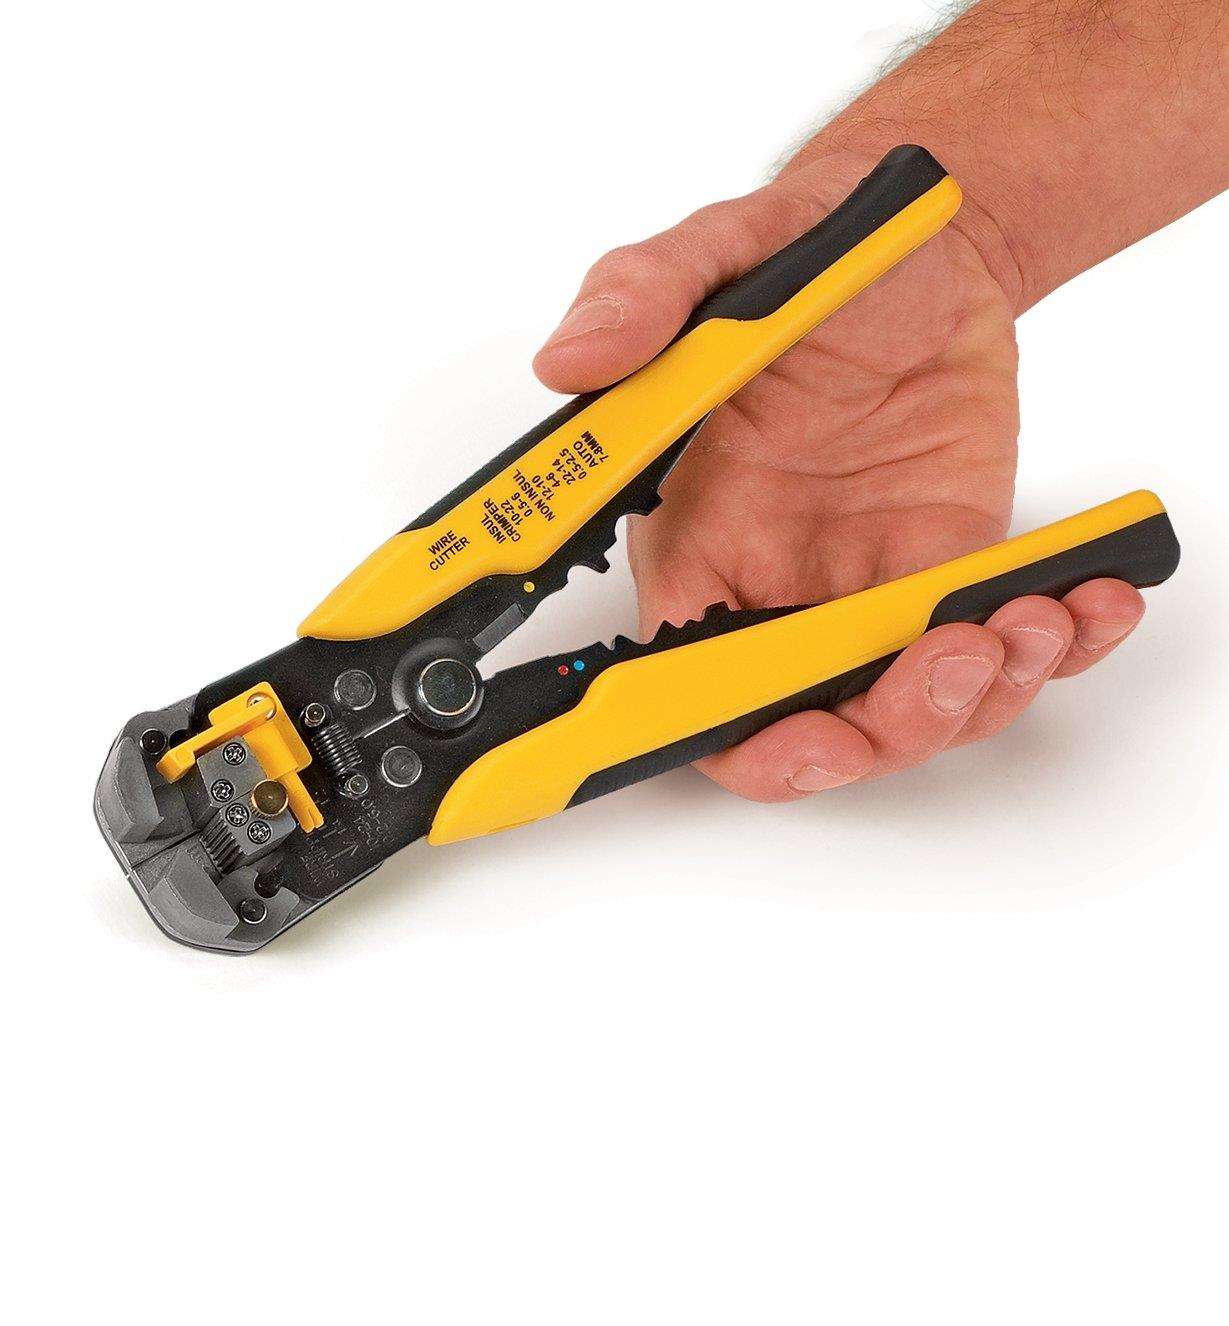 Holding the self-adjusting wire stripper handles